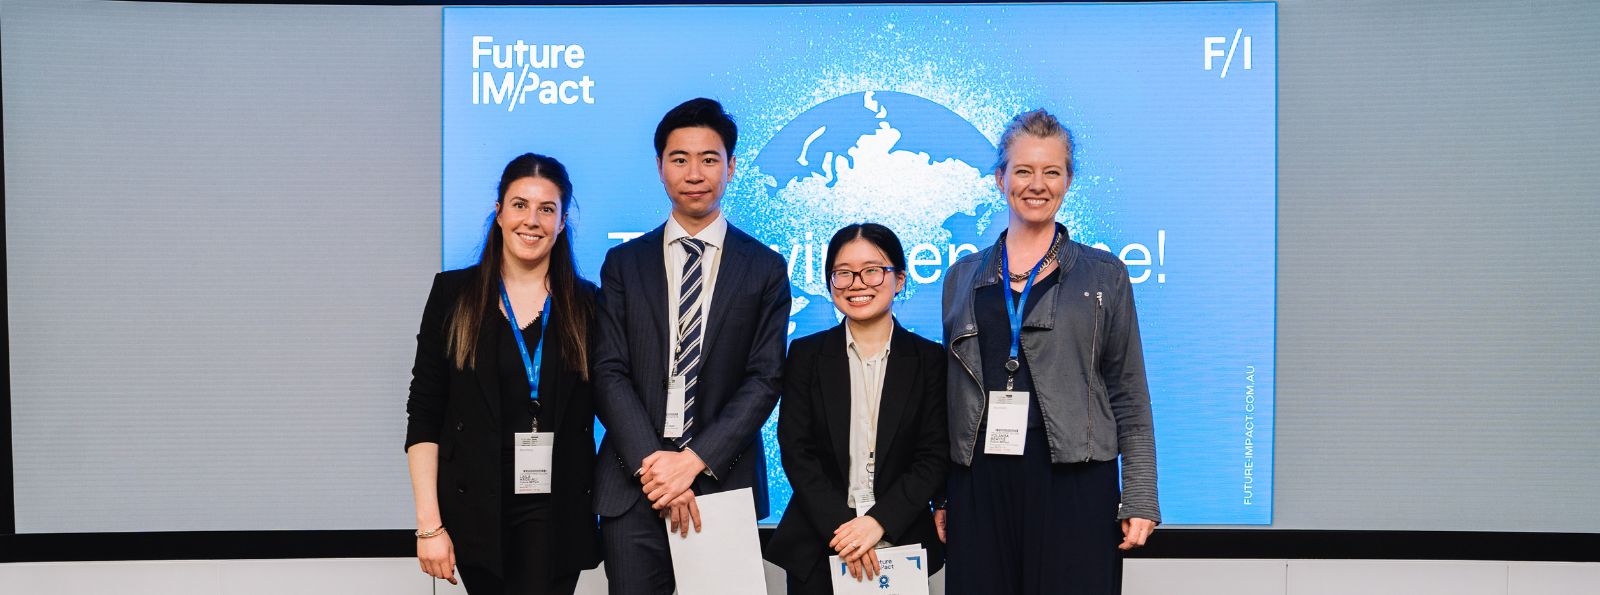 Stephanie and Jeff after winning Future IM/Pact's 2022 Investment Competition. From left to right: Laila Hage-Ali, Jeff Xiong, Stephanie Liow and Yolanda Beattie. (Source: Supplied)